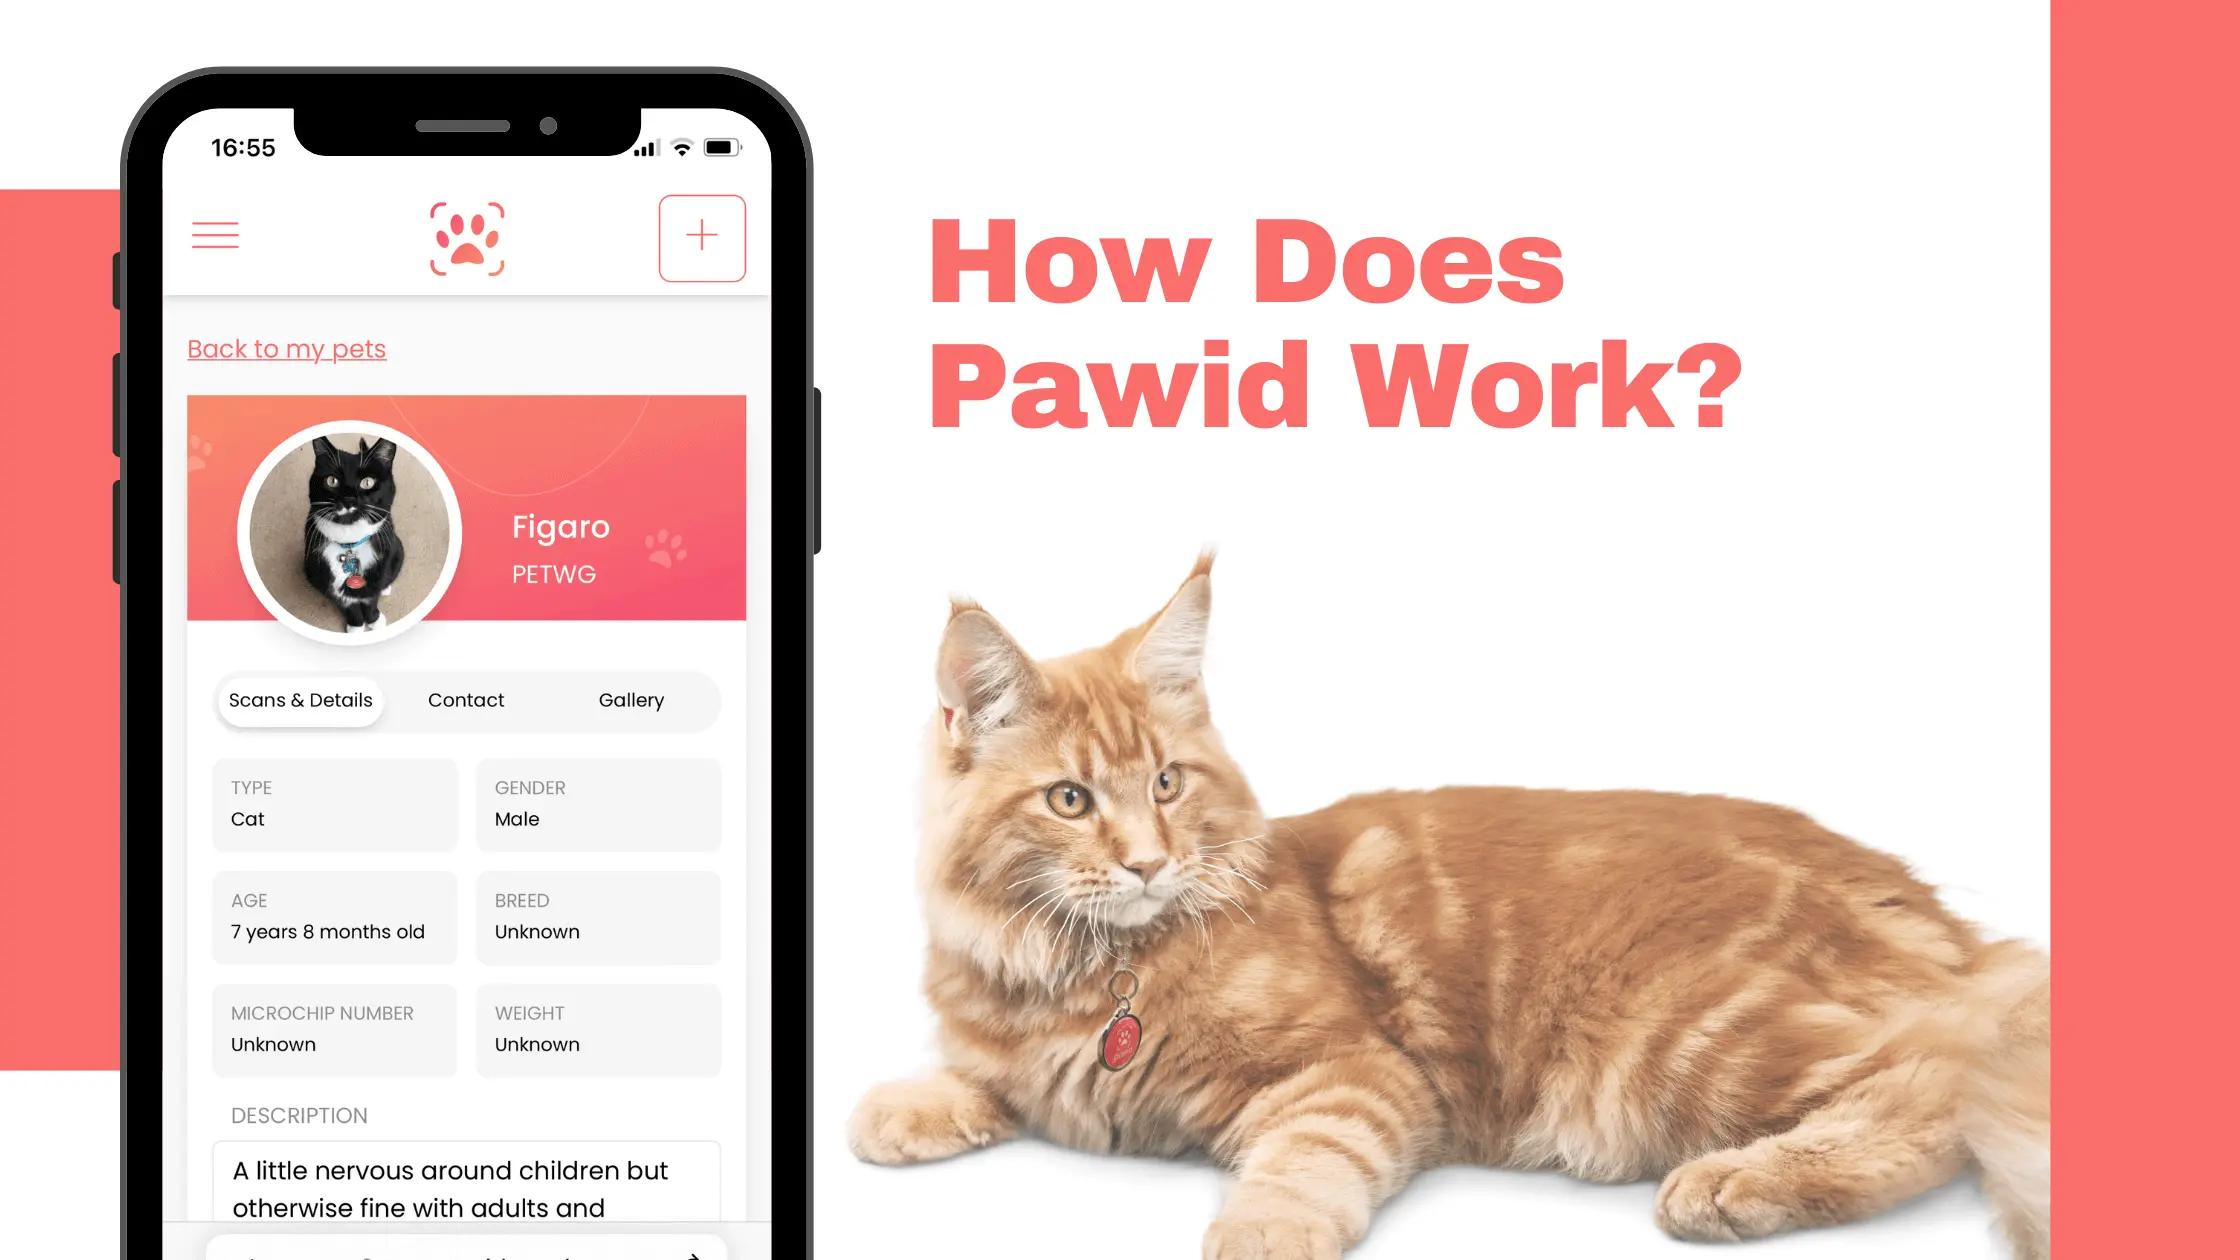 How Does PAWID Work?